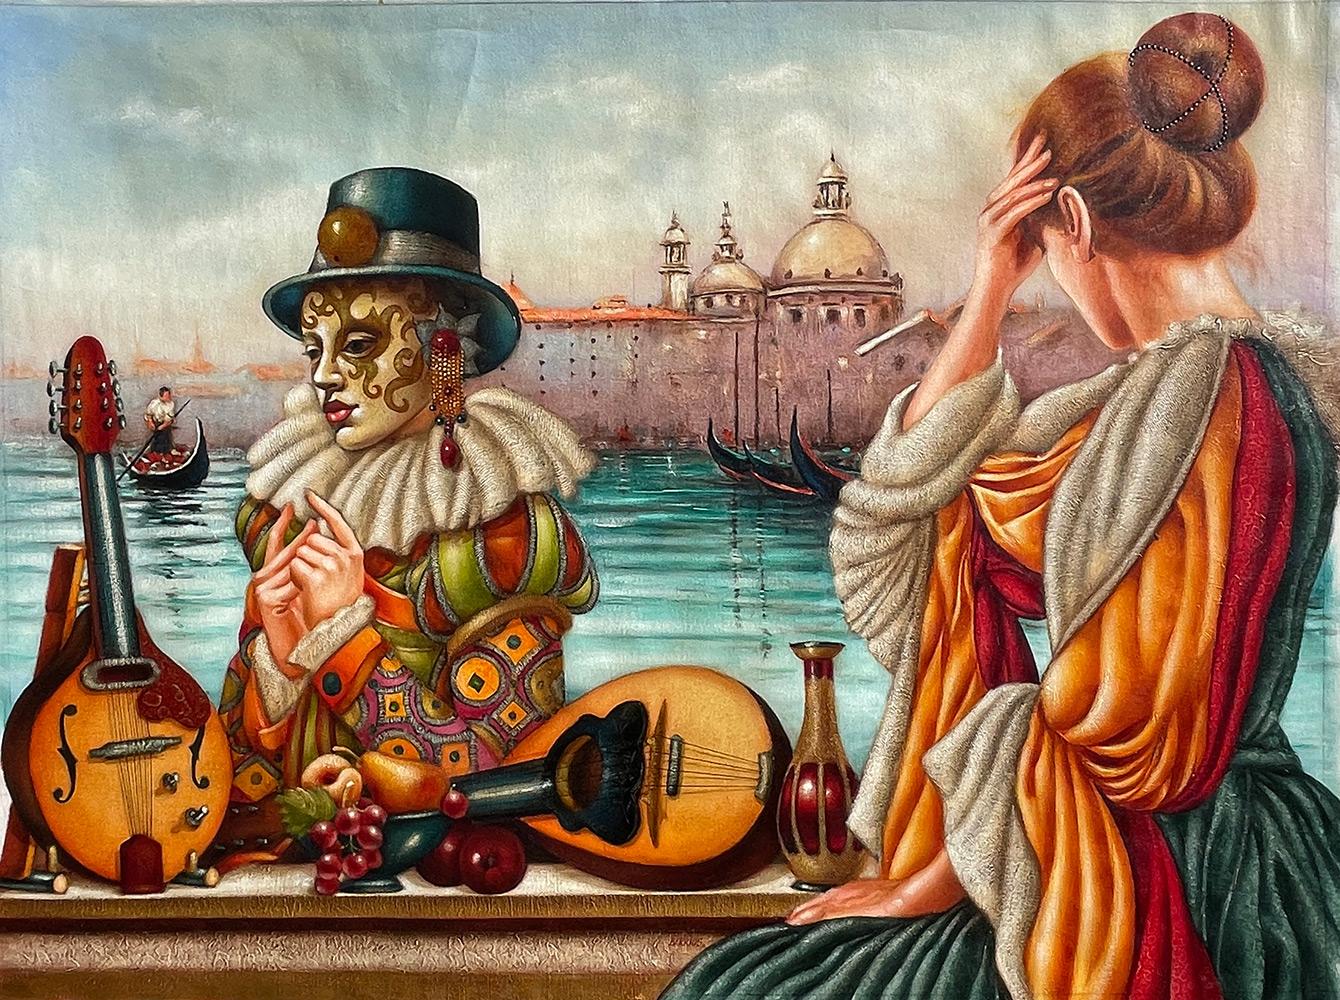 Artist: Edgar Barrios
Title: Venezia Languid
Medium: Original Oil on Canvas
Signature: Hand-signed by the Artist
Size: Approximately 48x36 inches
Framed: This artwork comes un-framed and un-stretched. This item will come rolled. 
Biography: Edgar